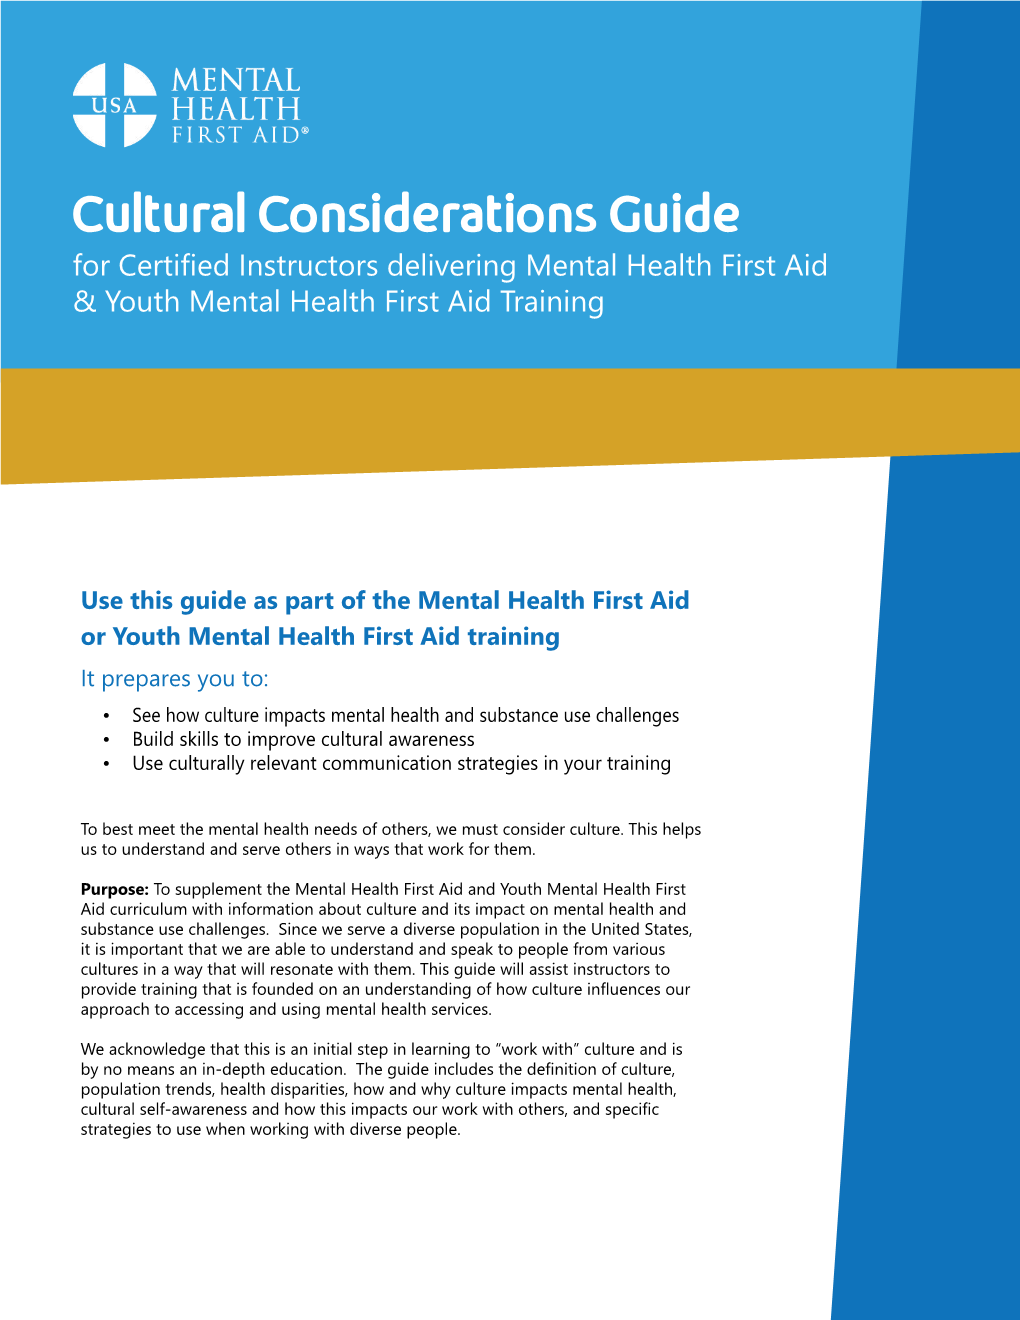 Cultural Considerations Guide for Certified Instructors Delivering Mental Health First Aid & Youth Mental Health First Aid Training